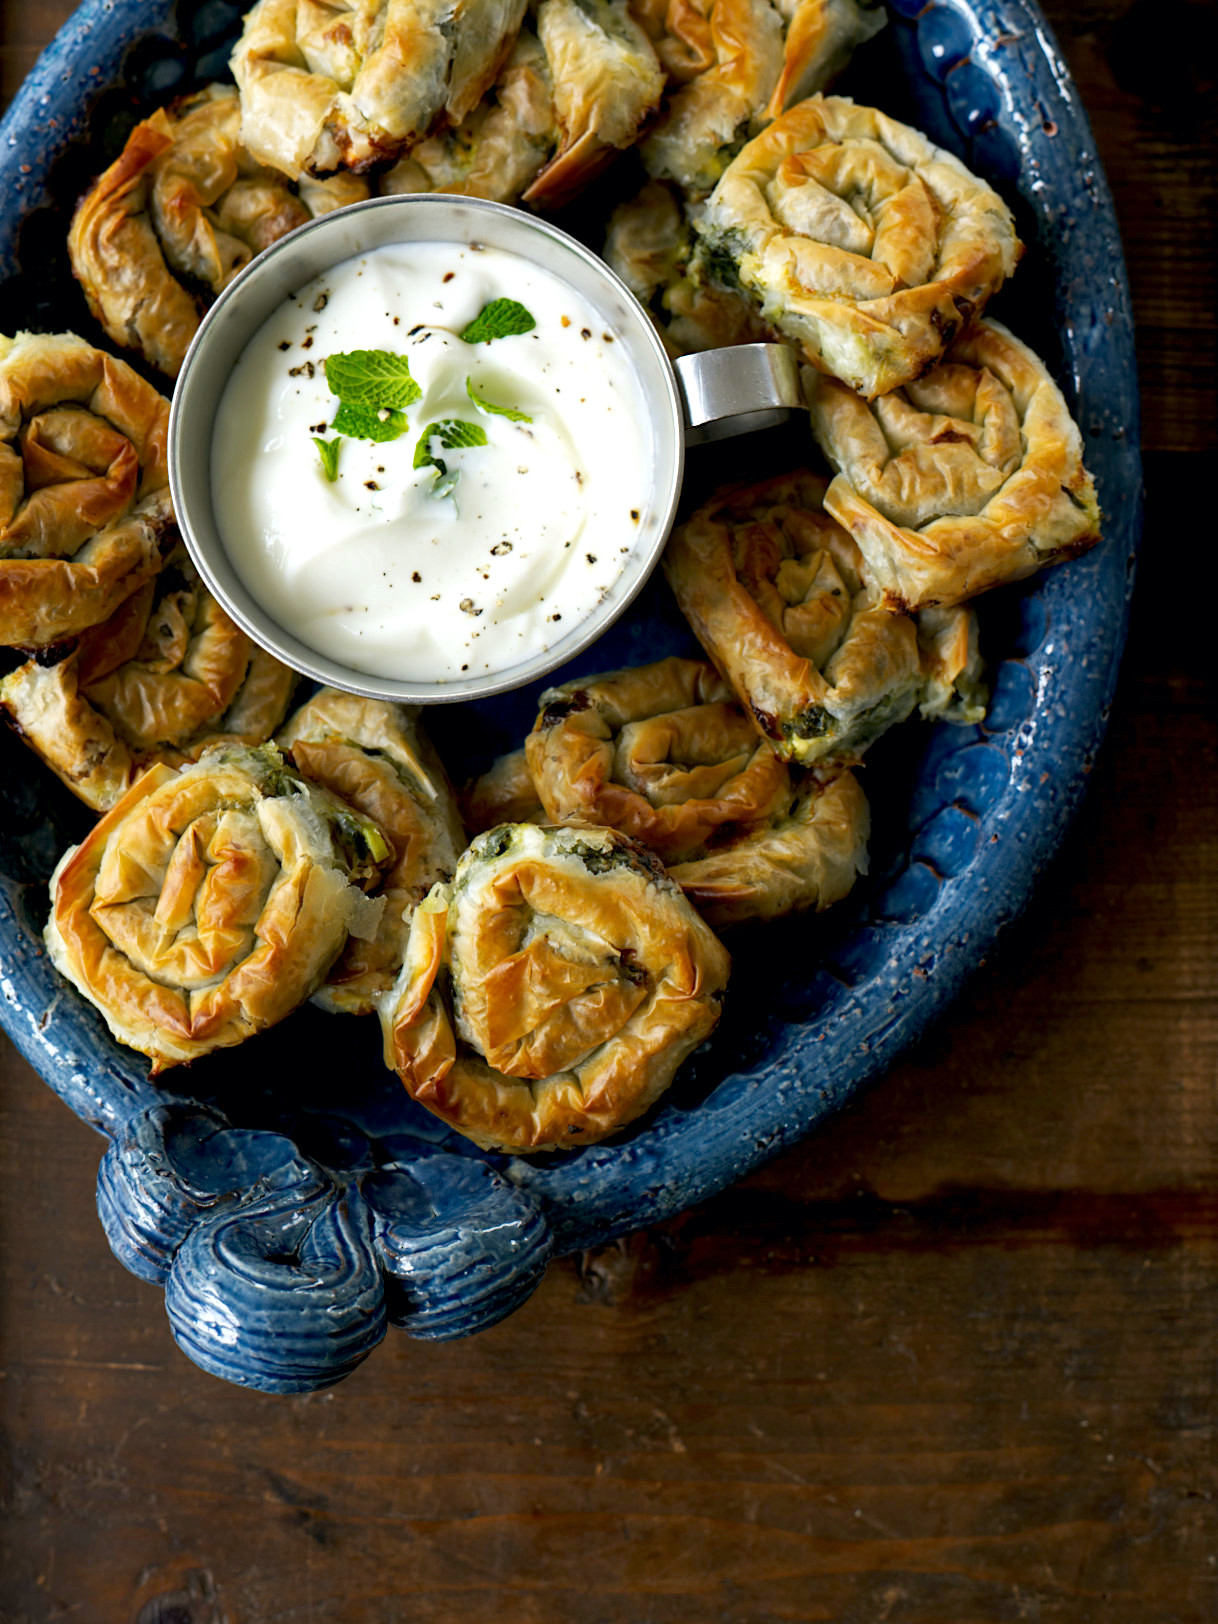 Spinach Pies from Crete